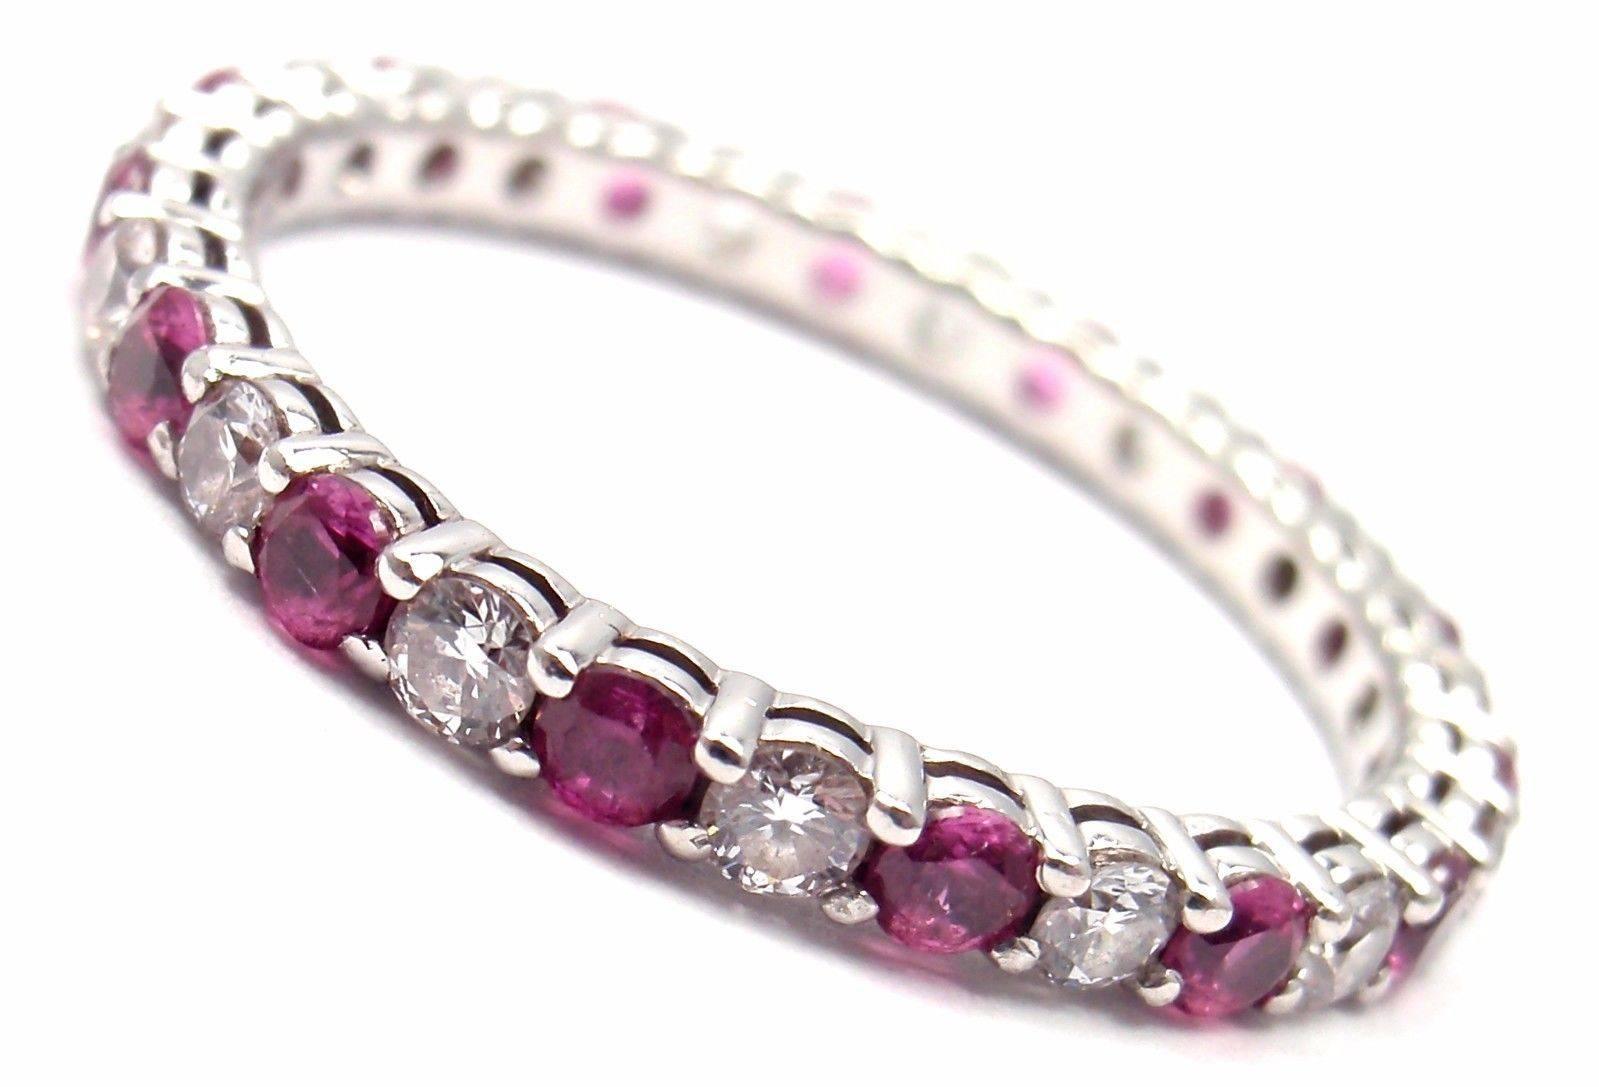 Tiffany & Co Platinum Diamond And Pink Sapphire Shared Setting Band Ring.
With Round brilliant cut diamonds VS1 clarity, G color total weight approx. .42ct
Round pink sapphires .49ct

Measurements:
Ring Size: 6 3/4
Weight: 2.5 grams
Band